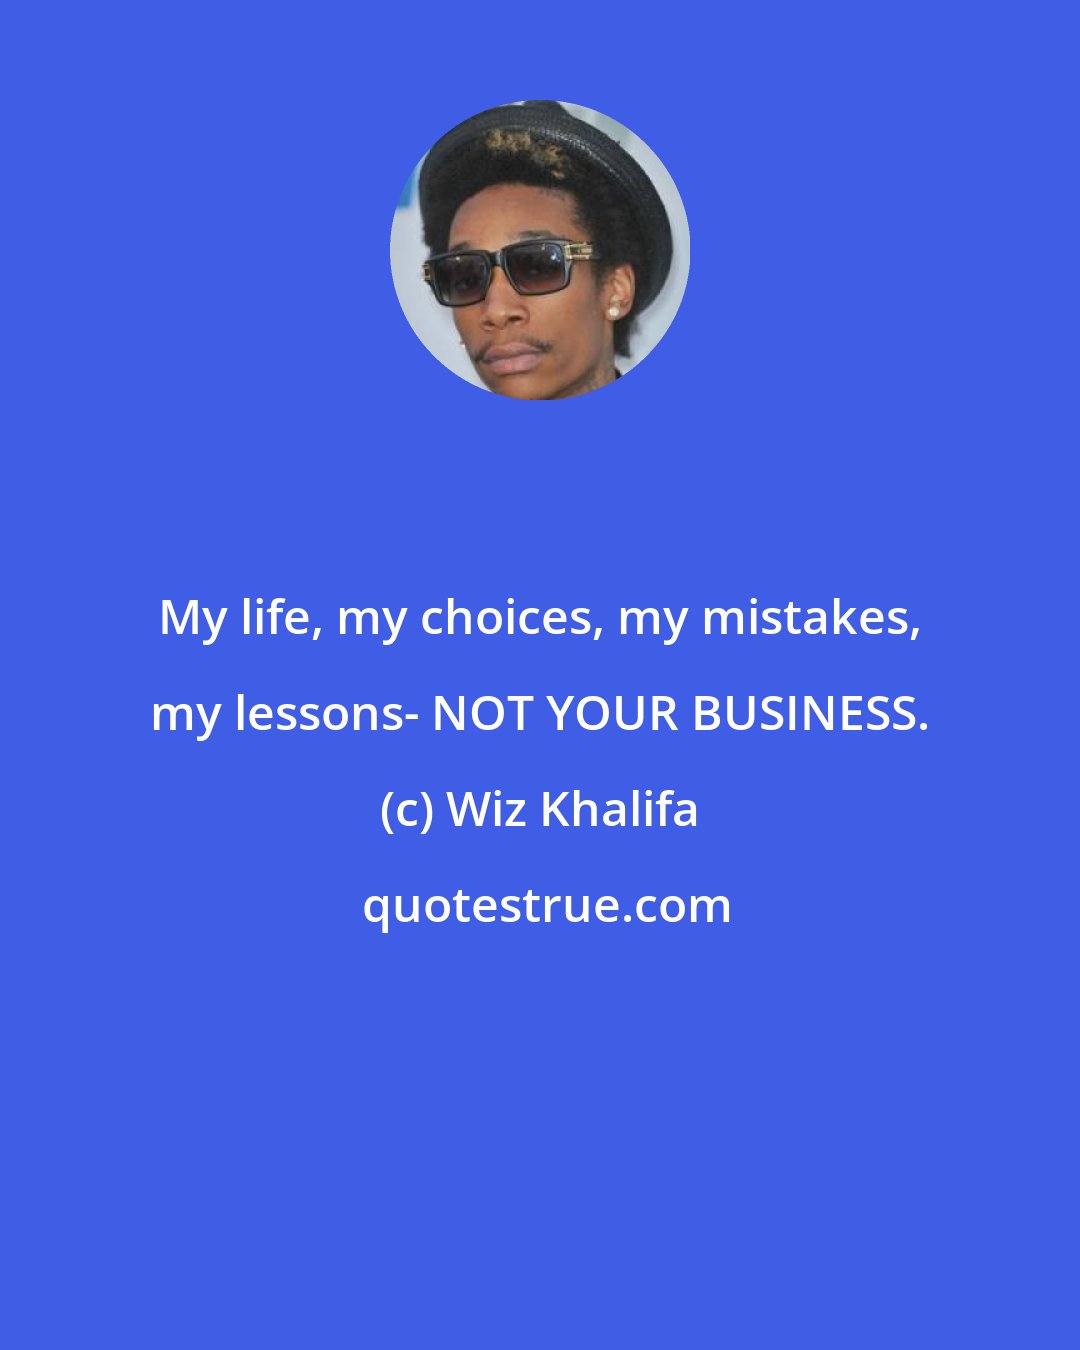 Wiz Khalifa: My life, my choices, my mistakes, my lessons- NOT YOUR BUSINESS.